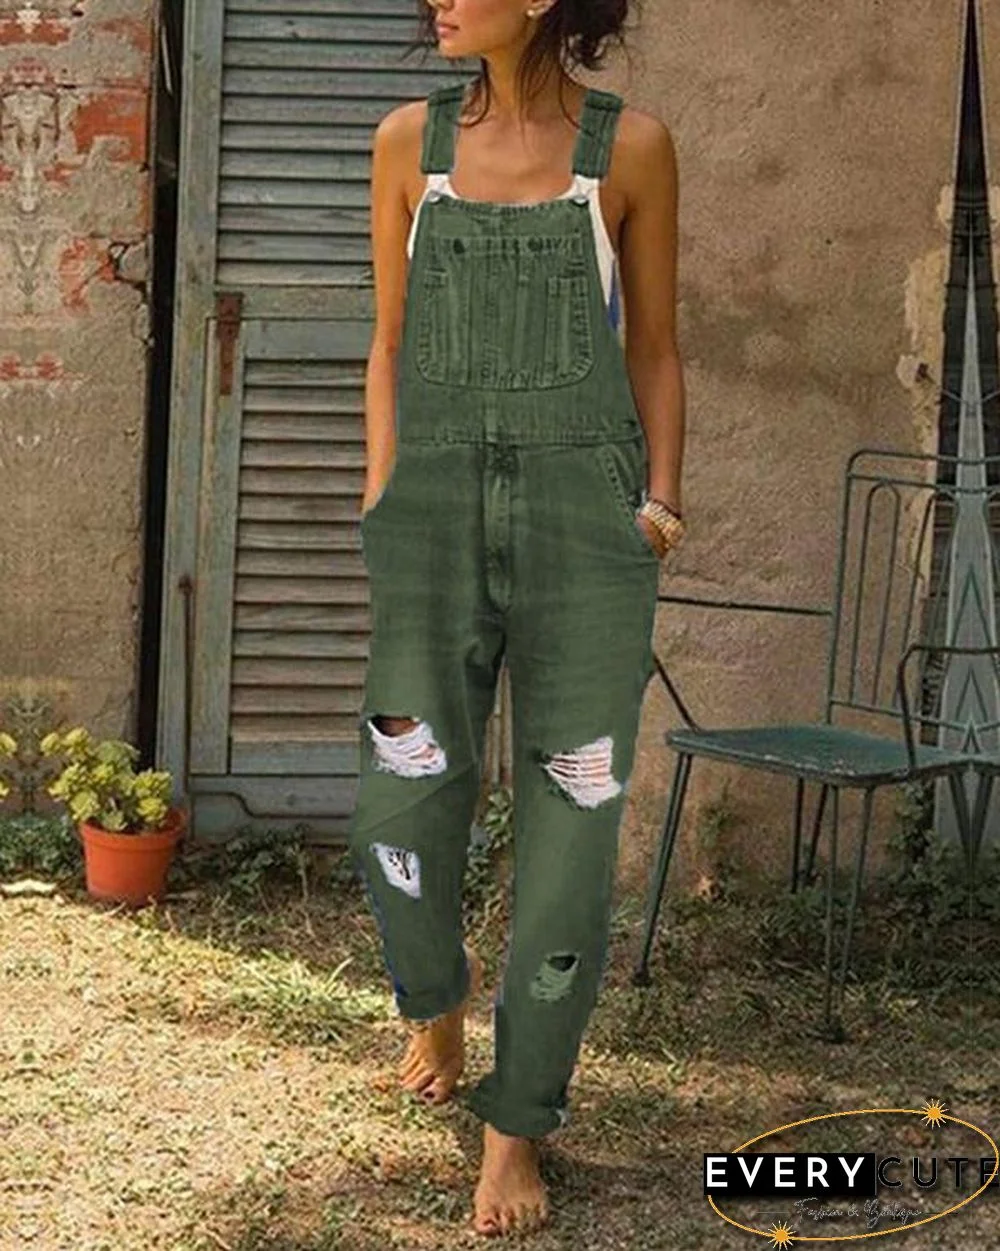 Women's Casual Jeans Denim Rompers Sleeveless Overalls Jumpsuit